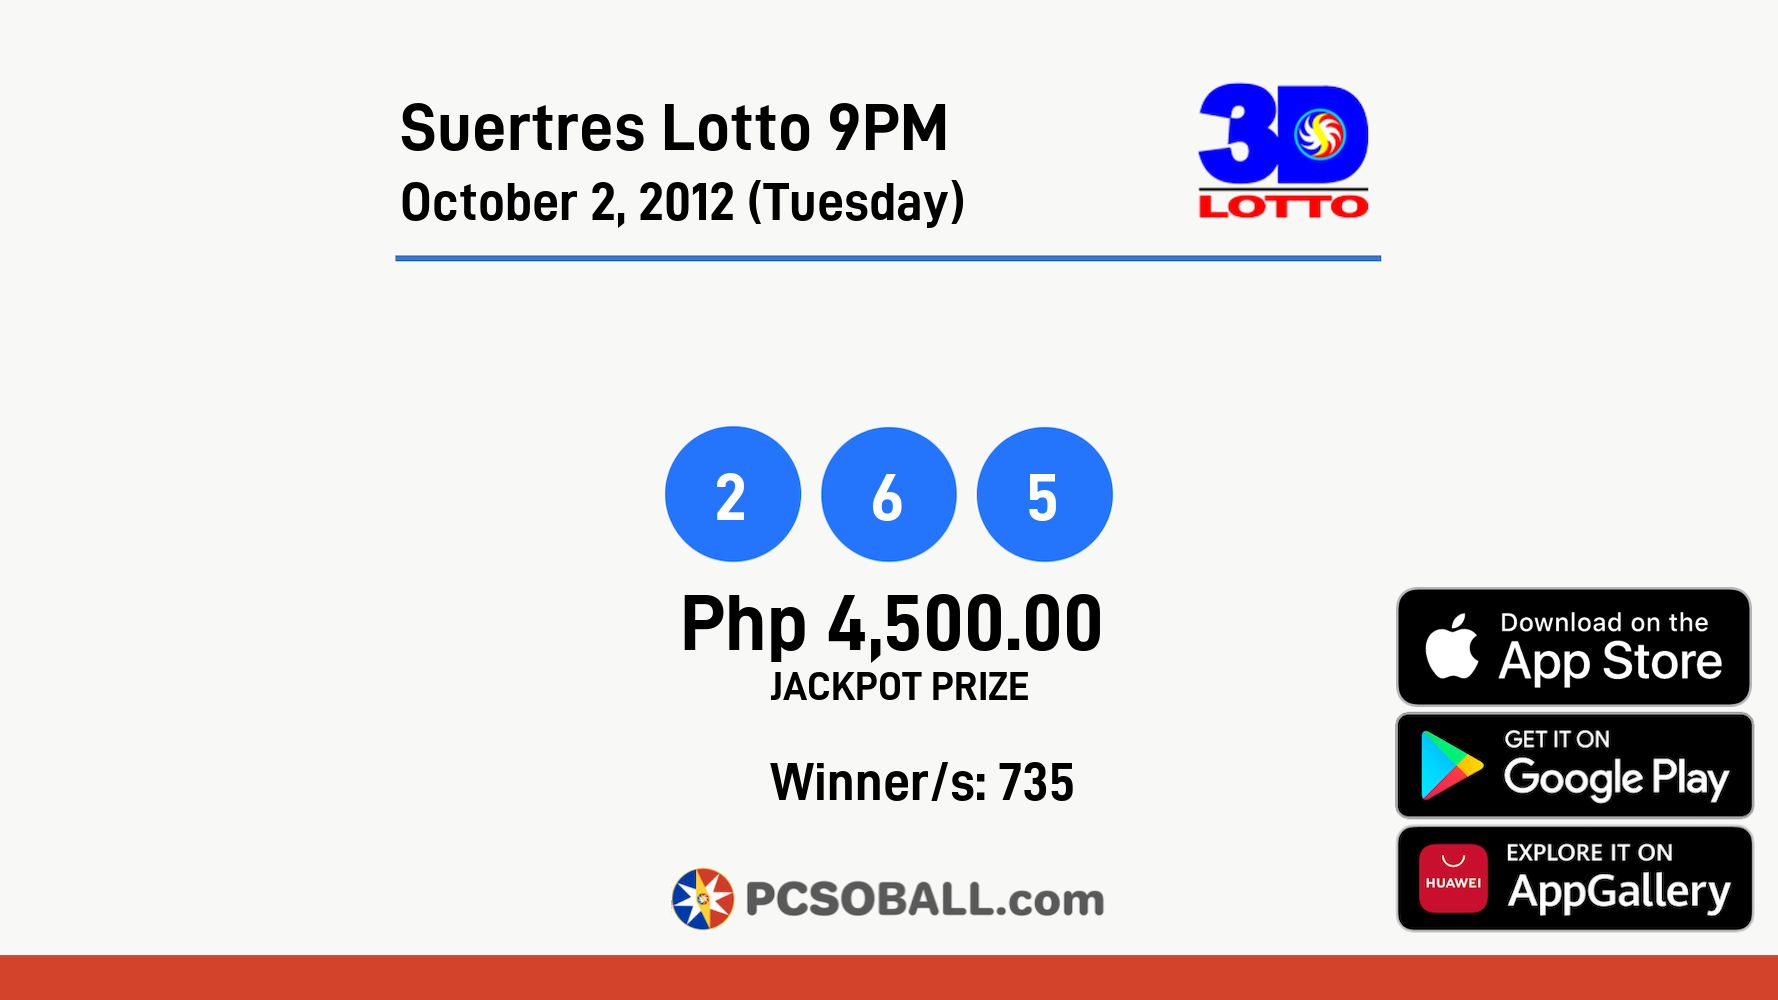 Suertres Lotto 9PM October 2, 2012 (Tuesday) Result